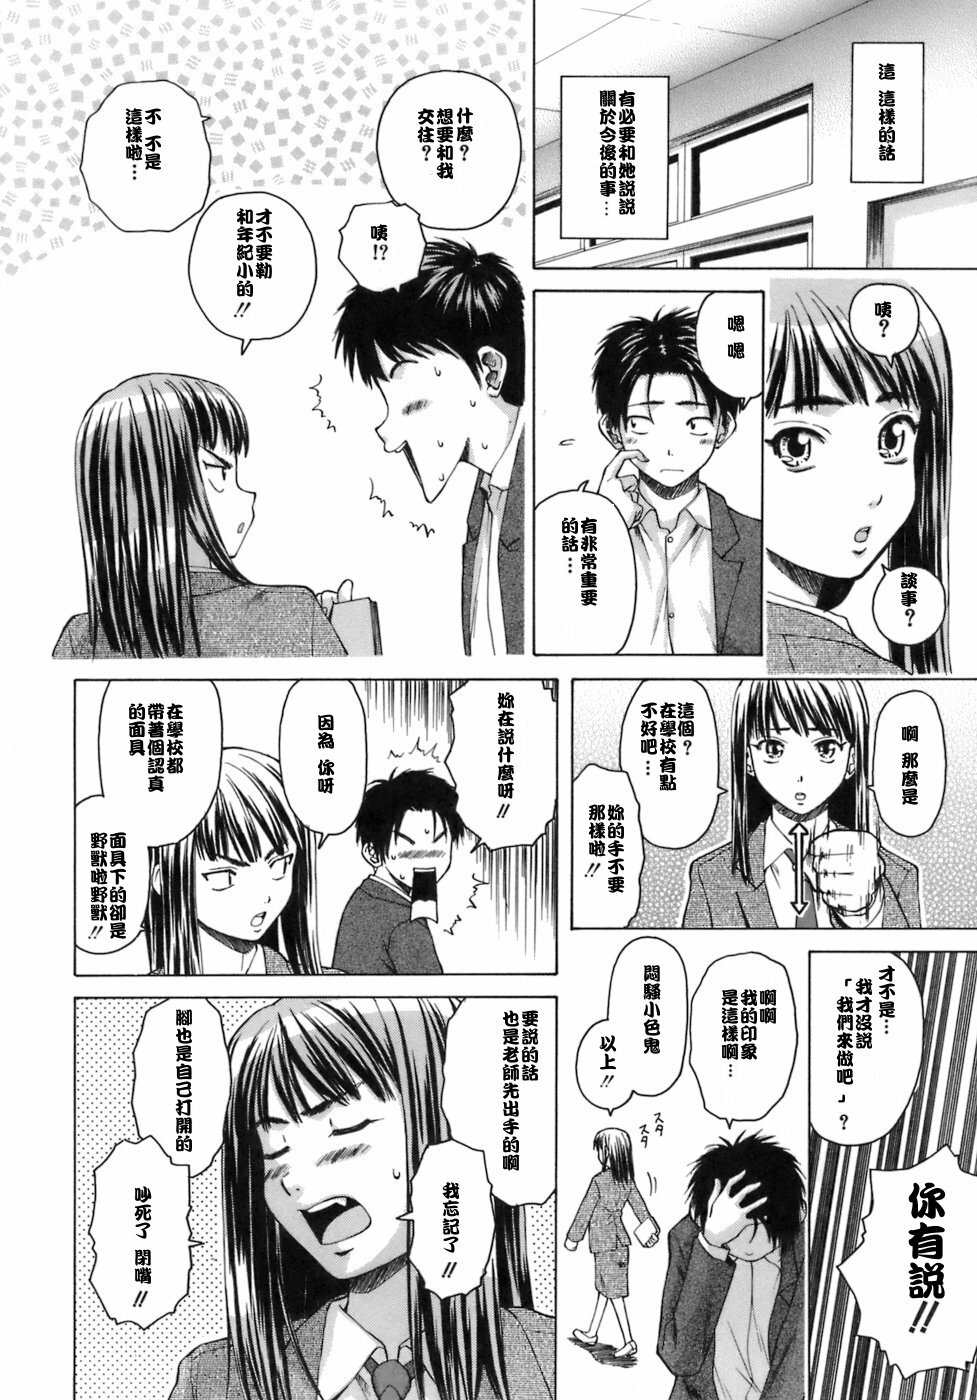 [Fuuga] Kyoushi to Seito to - Teacher and Student [Chinese] [悠月工房] page 45 full